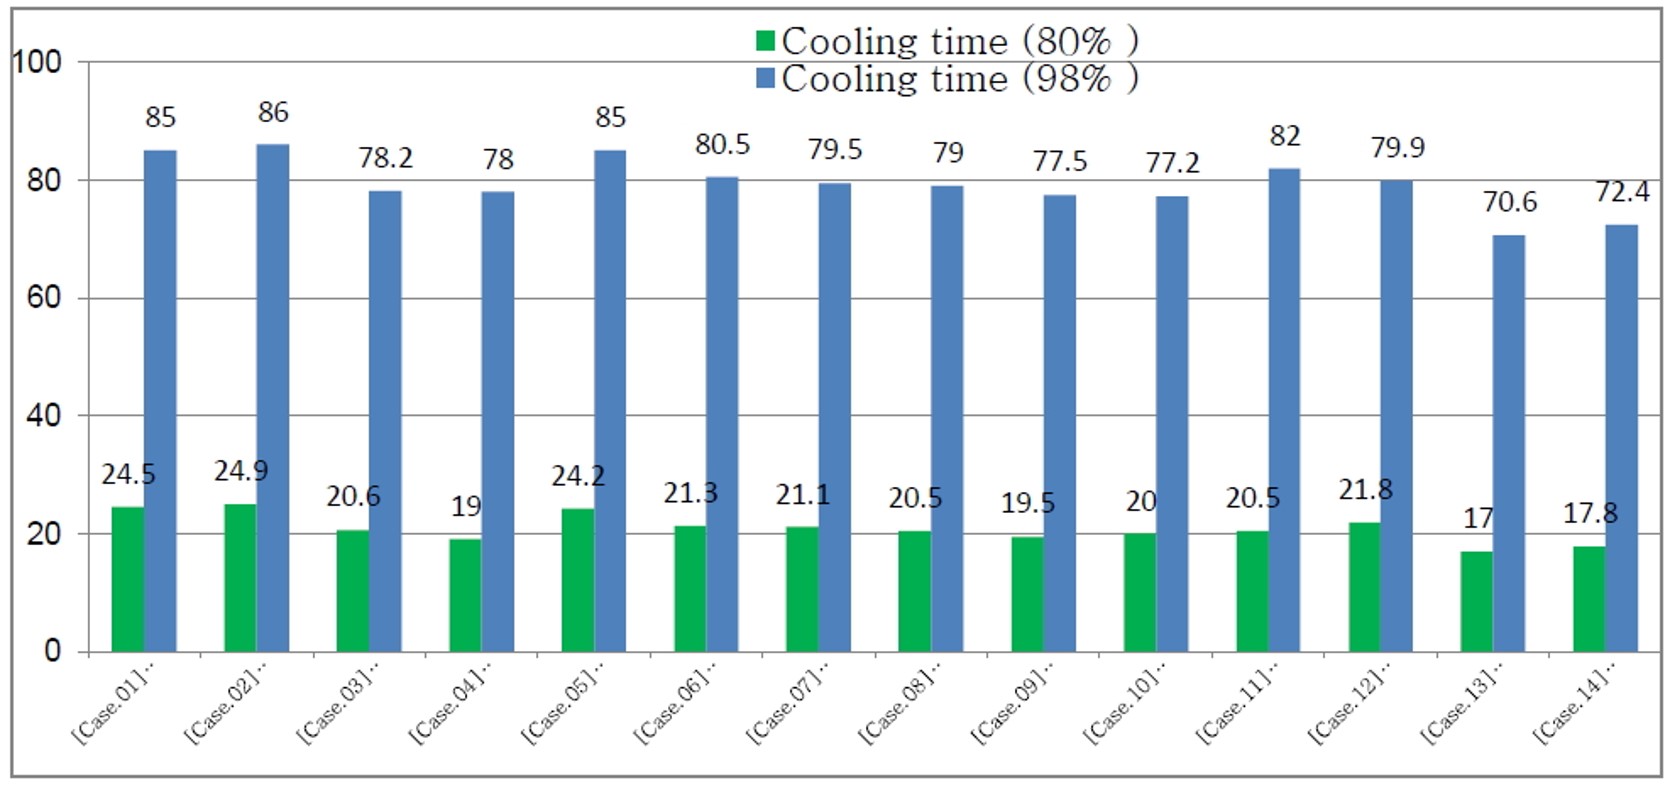 cooling time reduction - results